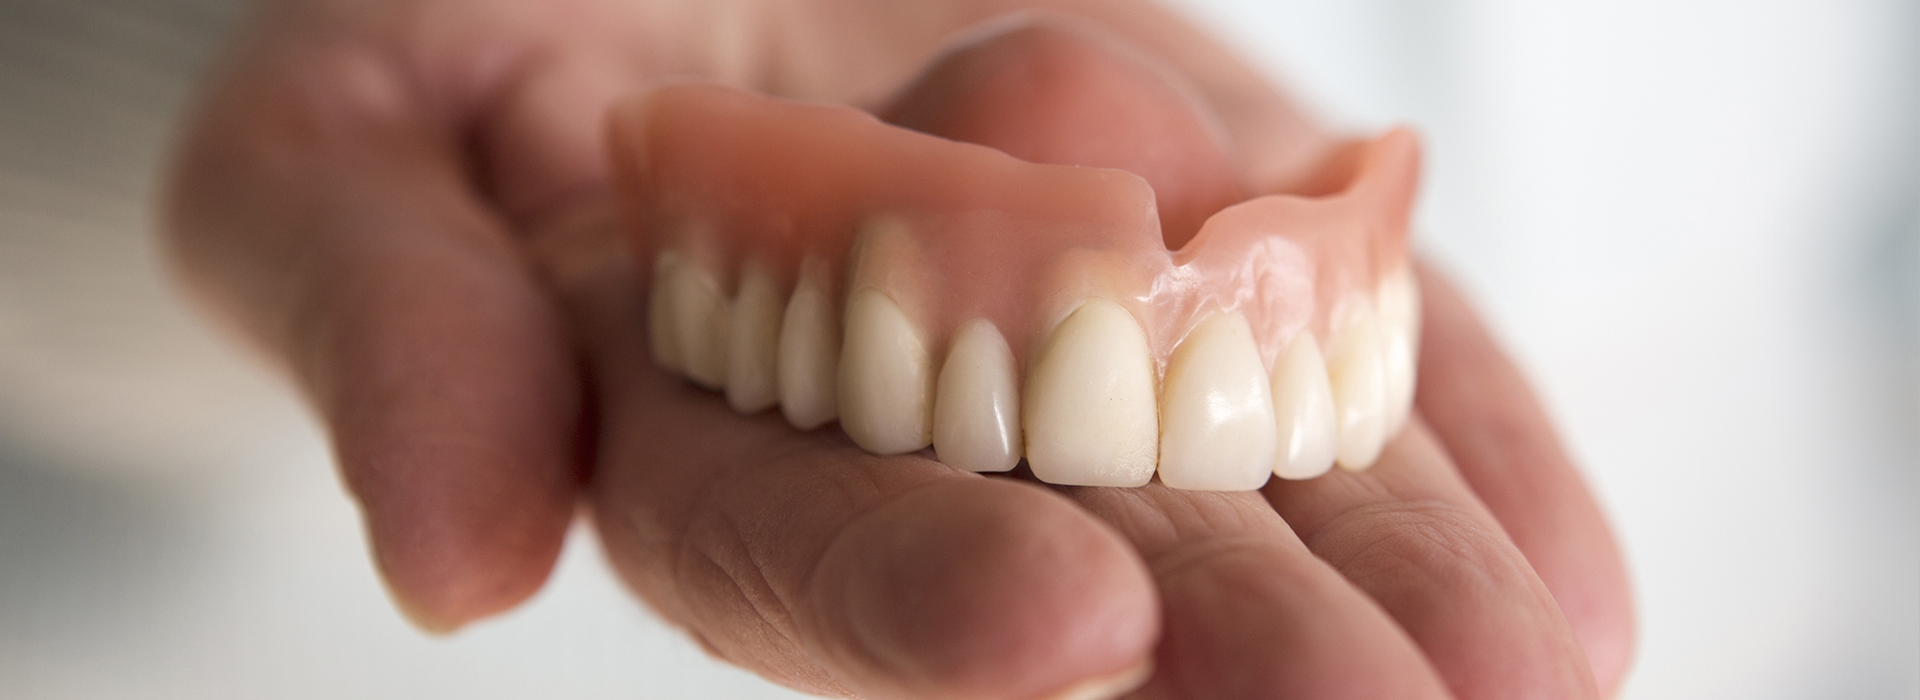 An individual is holding a set of artificial teeth with a natural tooth.